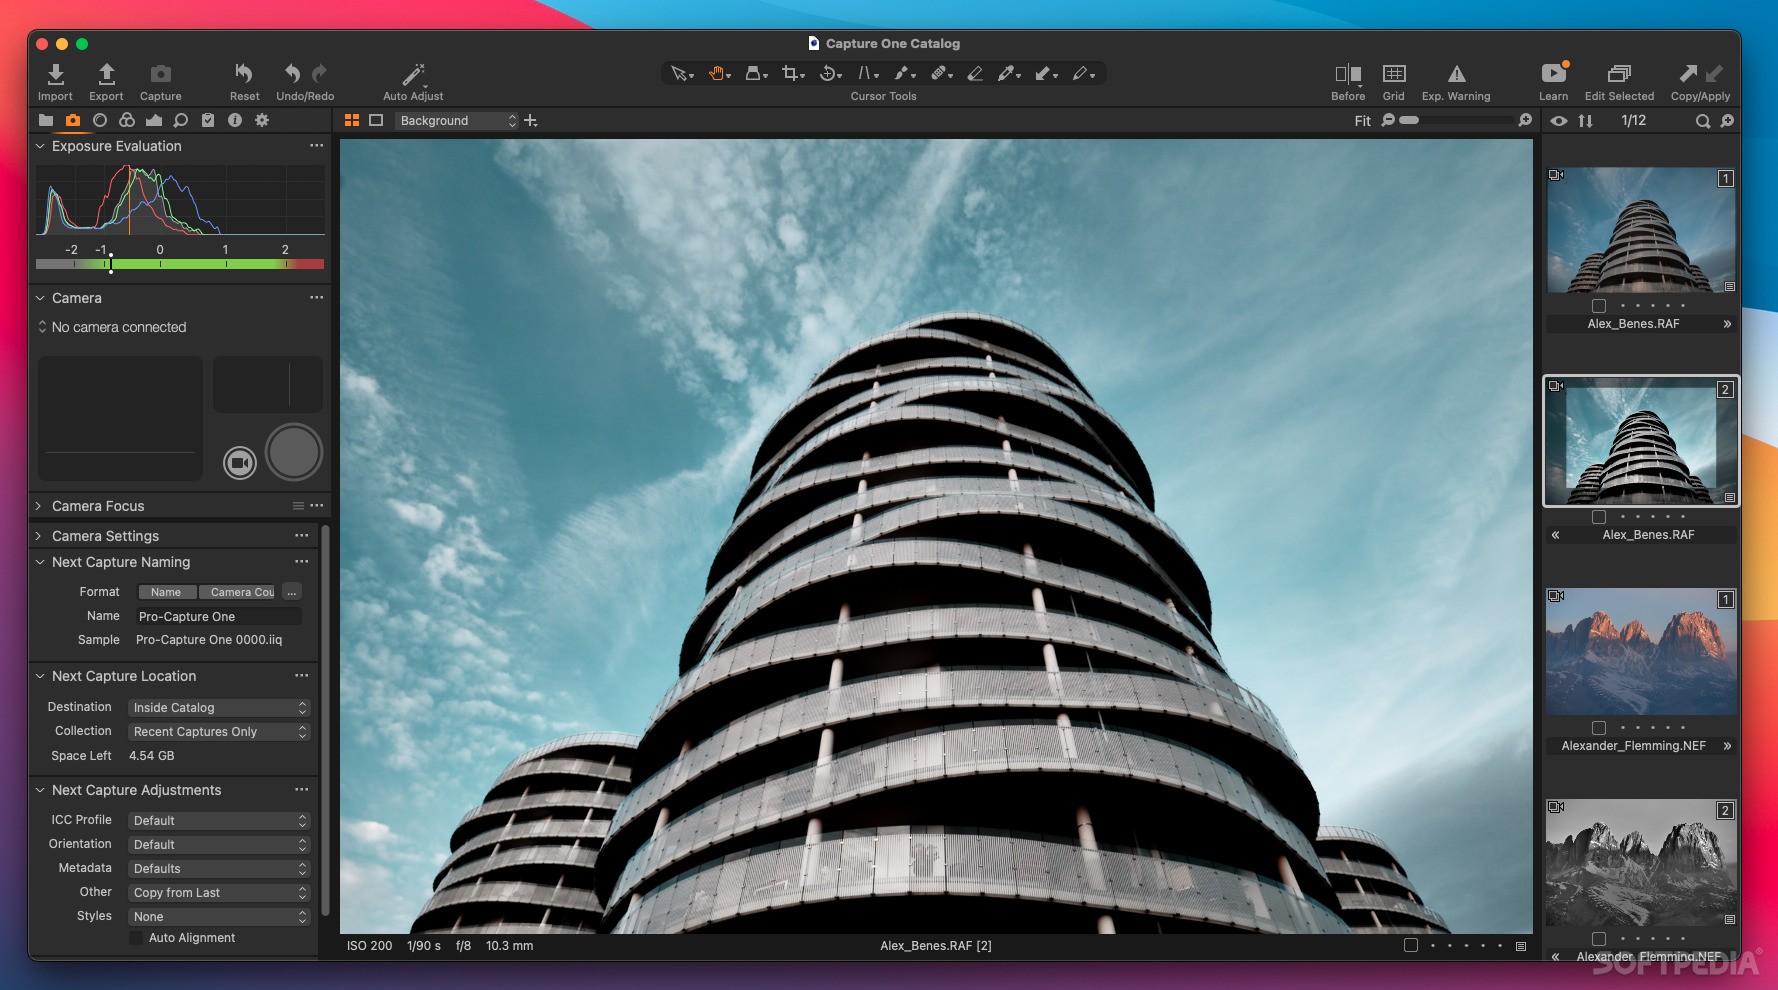 download the last version for mac Capture One 23 Pro